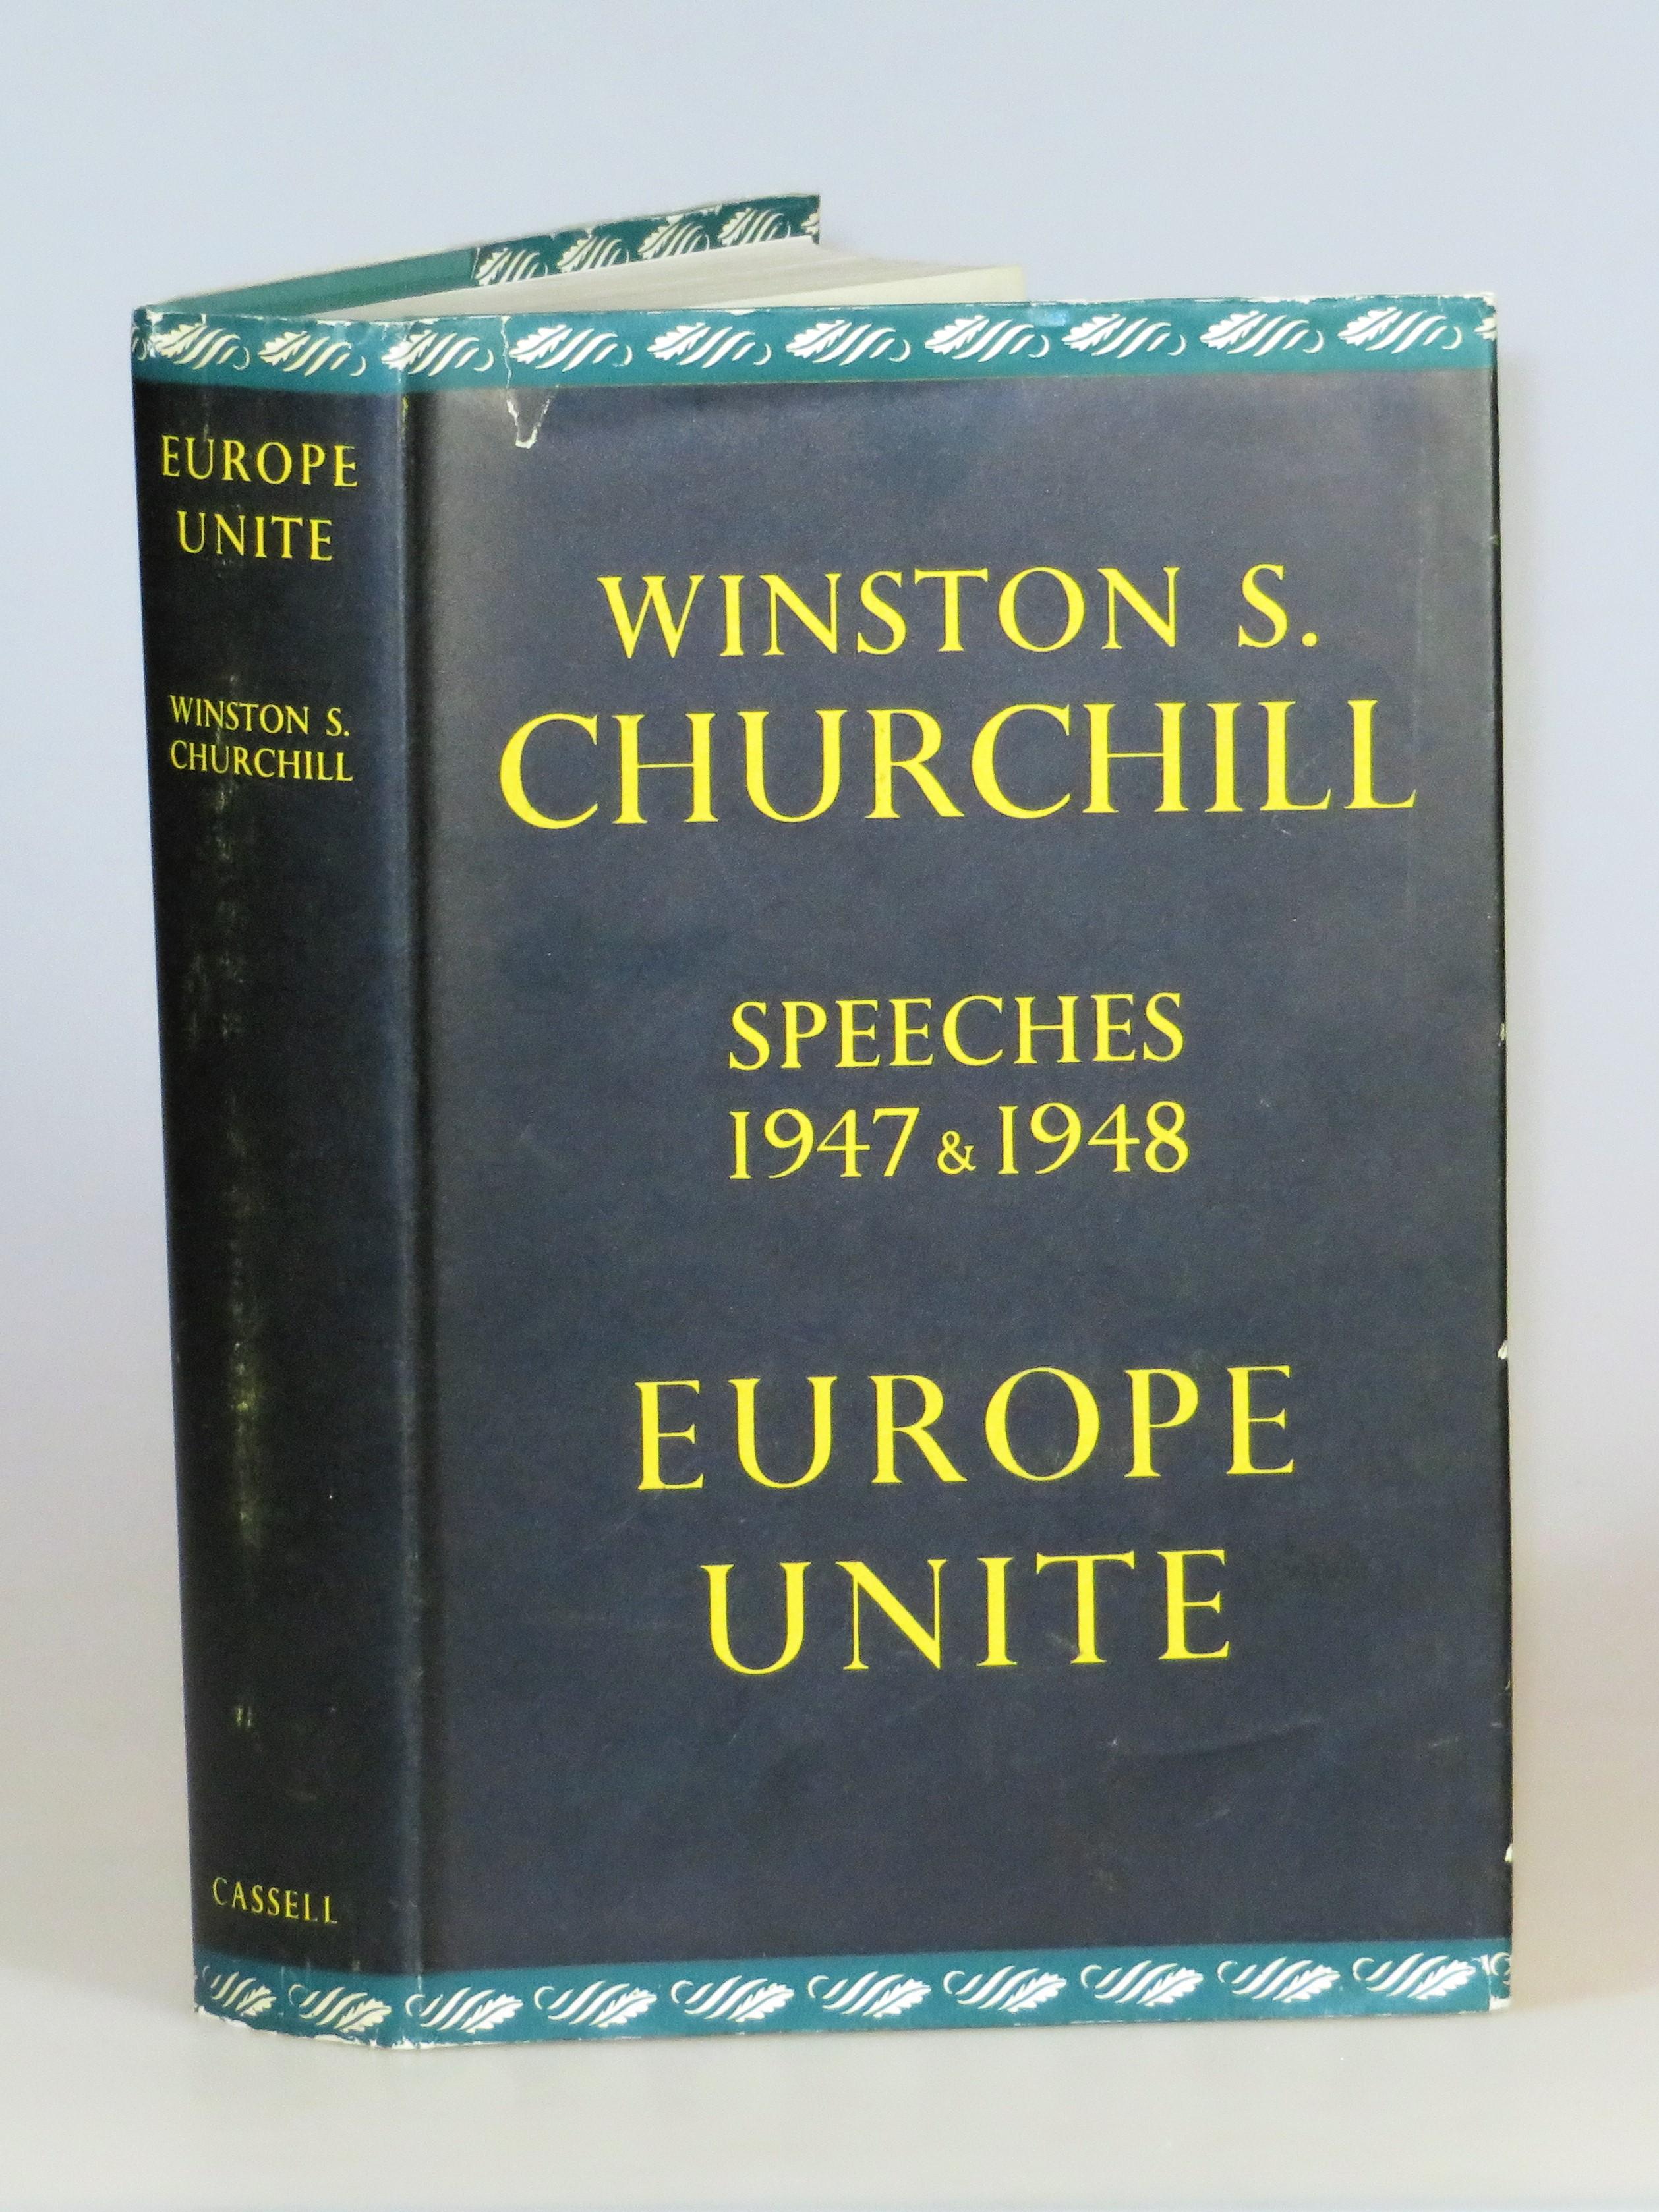 Europe Unite by Winston S. Churchill: Hardcover (1950) First edition ...